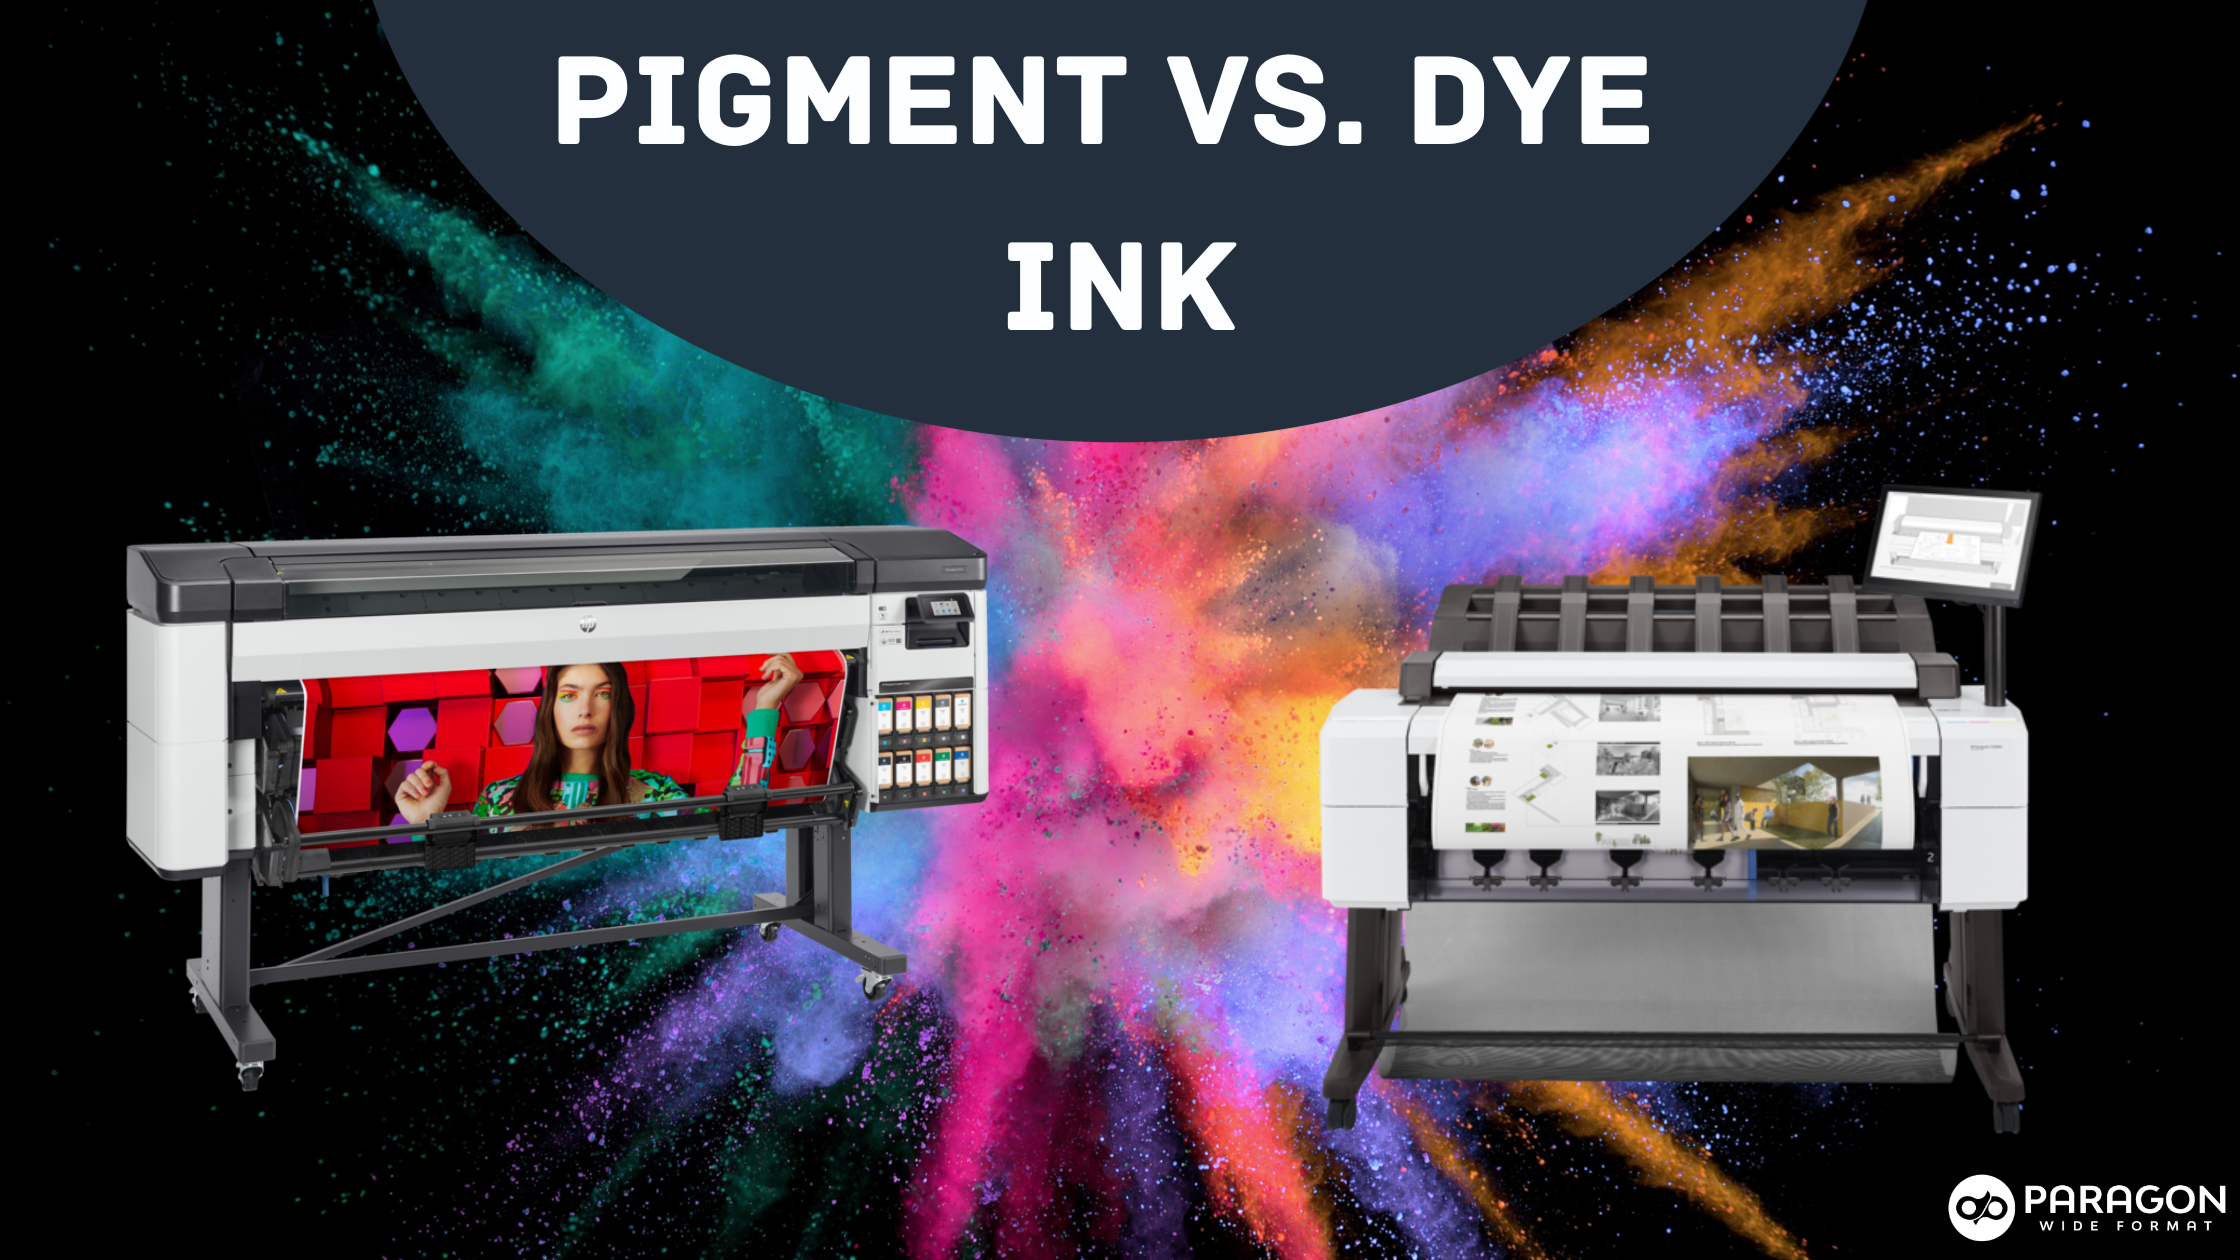 DYE VS. PIGMENT INKS HP T2600 and HP Z9+ Pro Printer Images